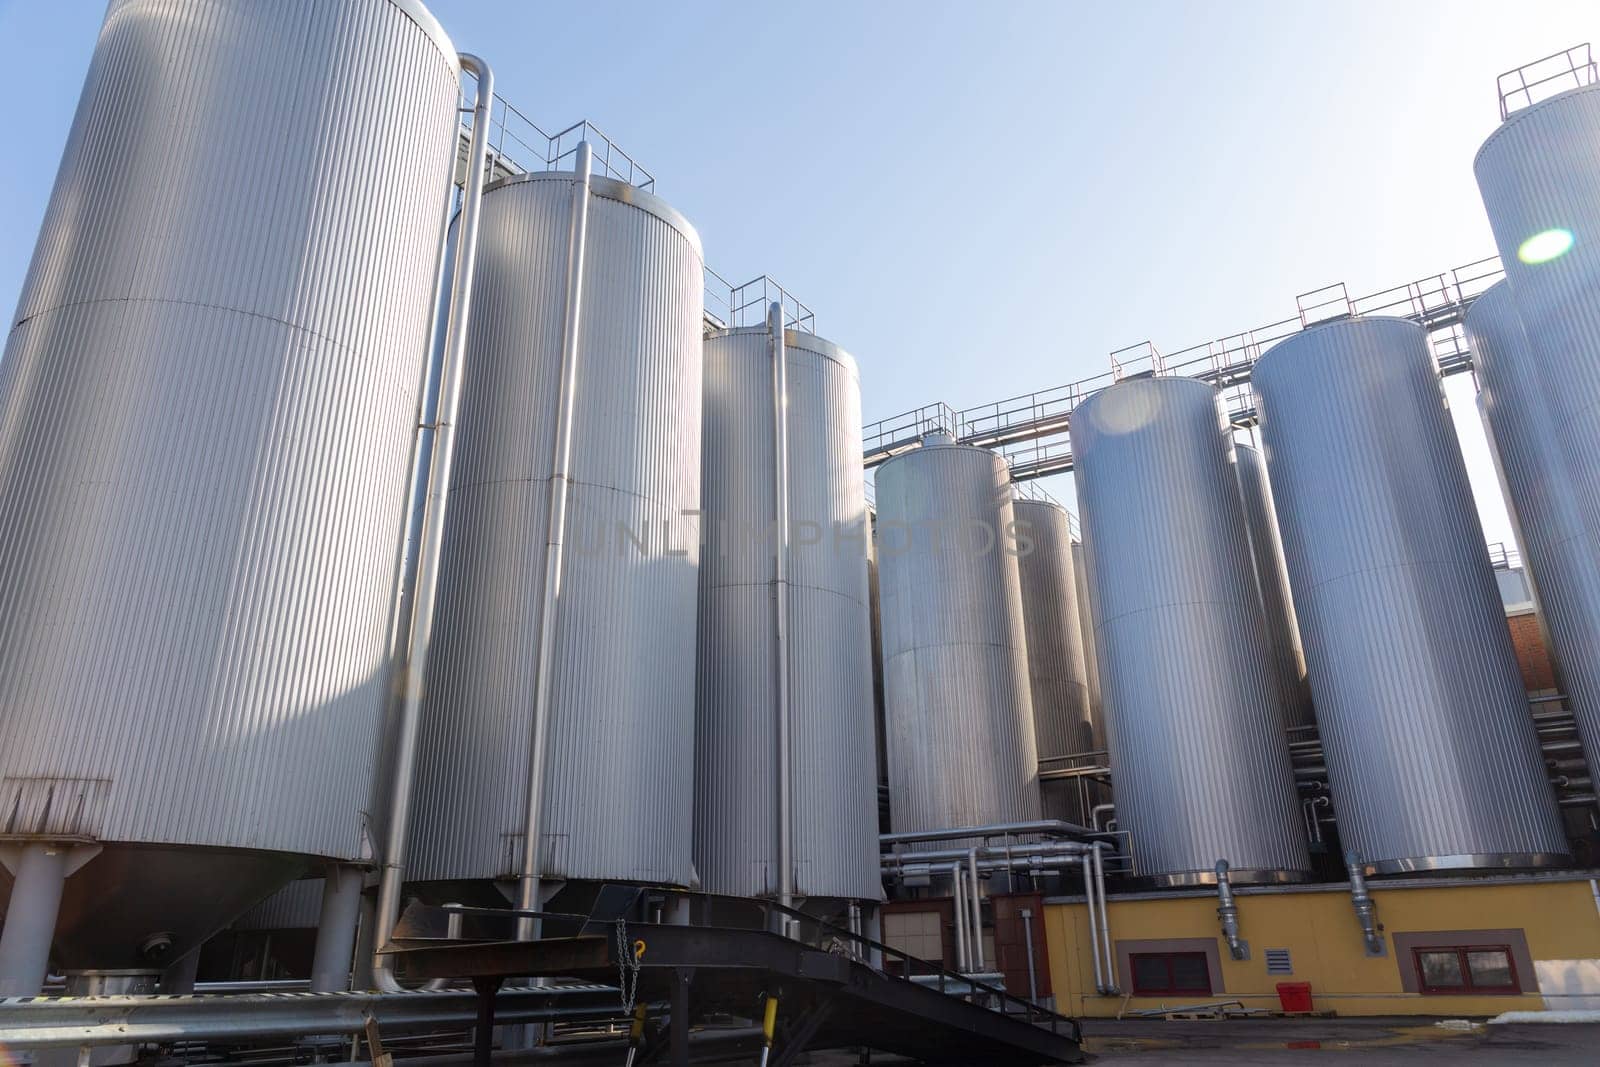 Brewery silos or tanks typically use for storing barley or fermented beer. Outdoor brewery equipment with stainless steel tanks and pipes.